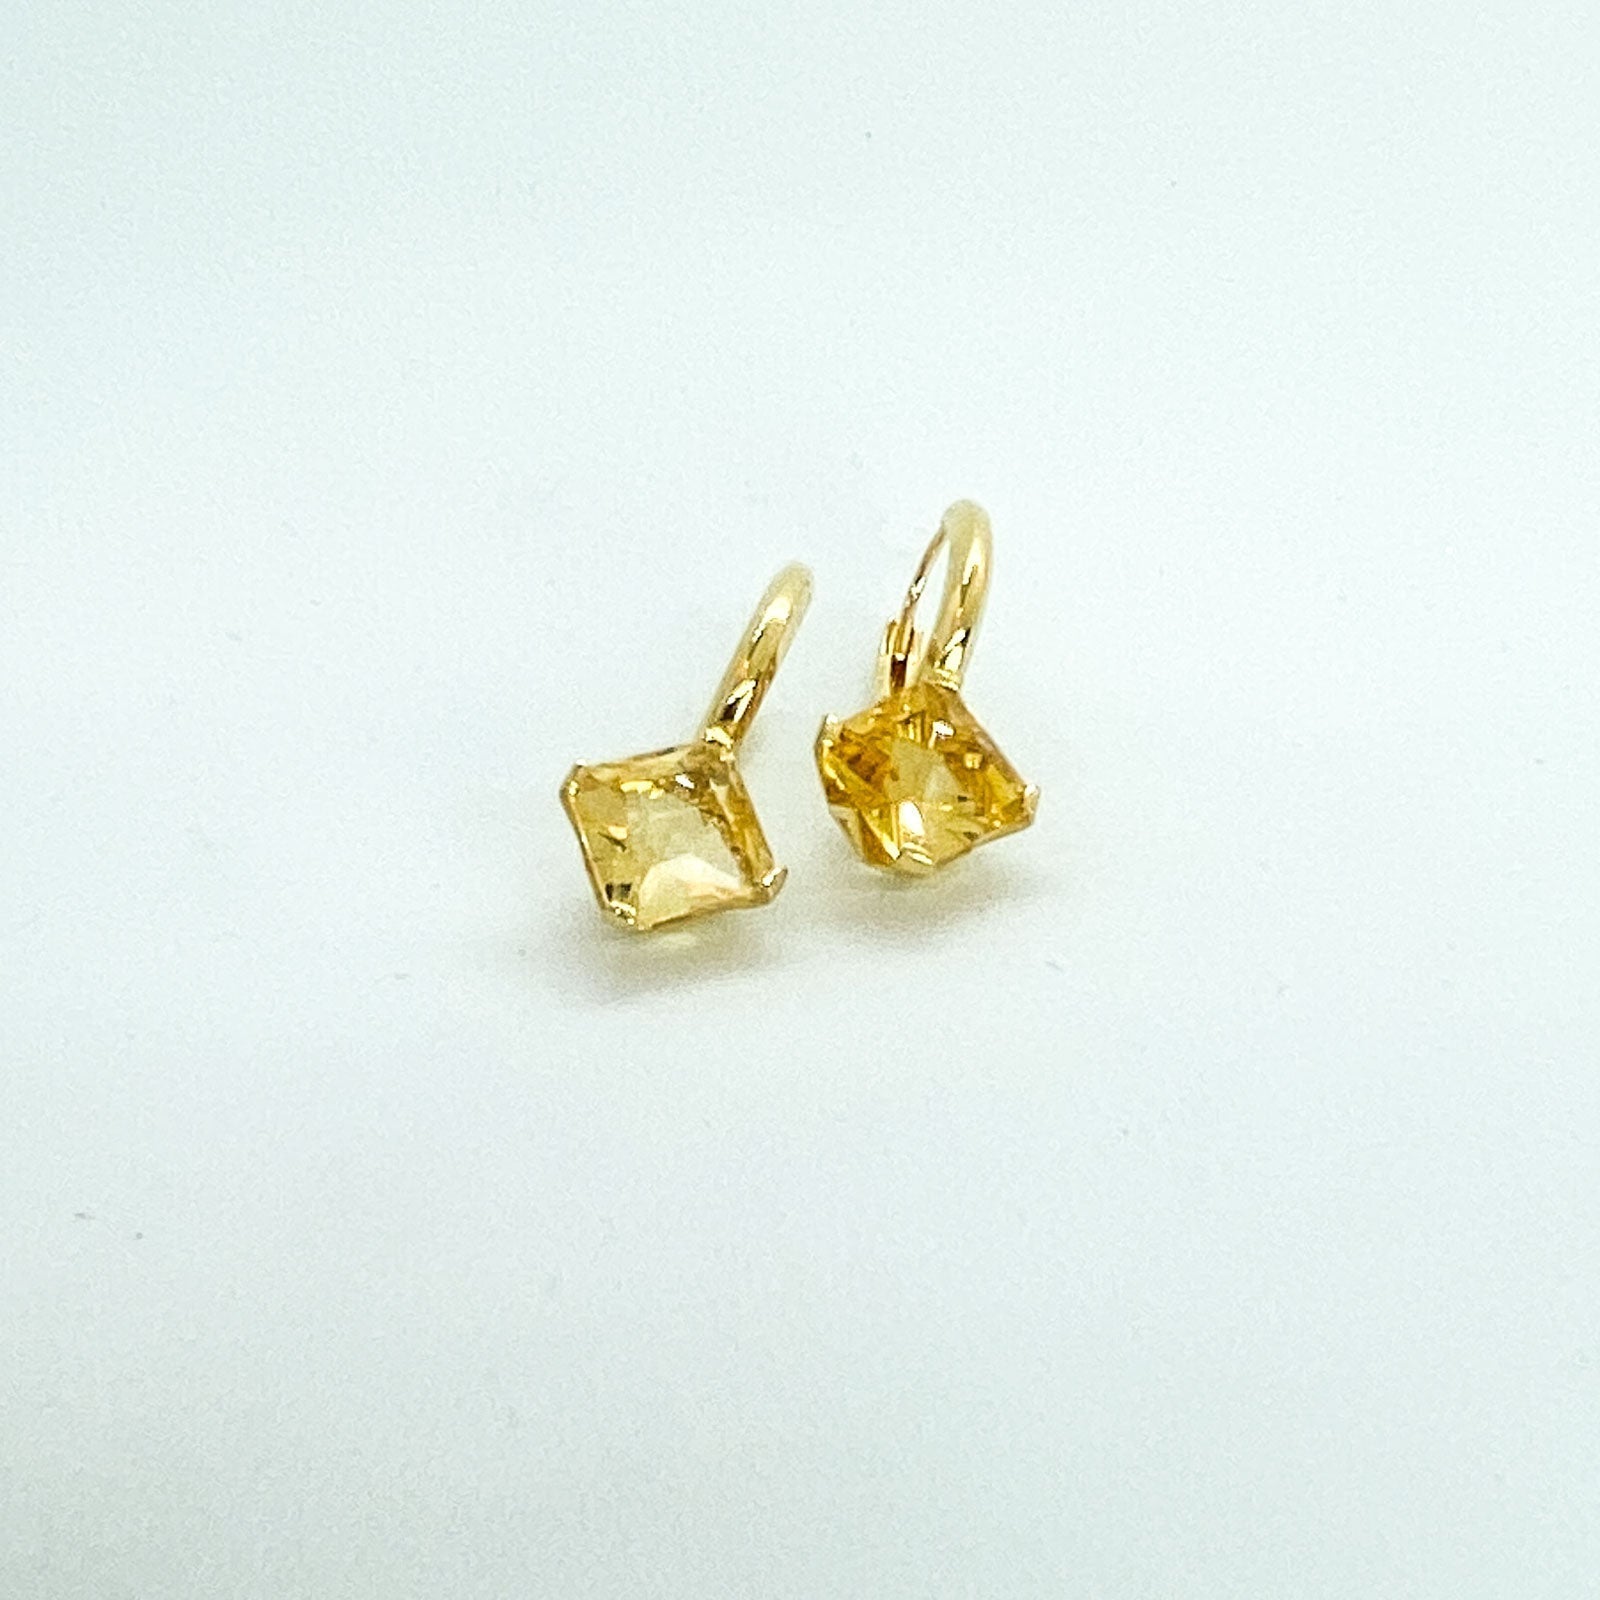 Citrine 8mm Square Earrings in Yellow Gold